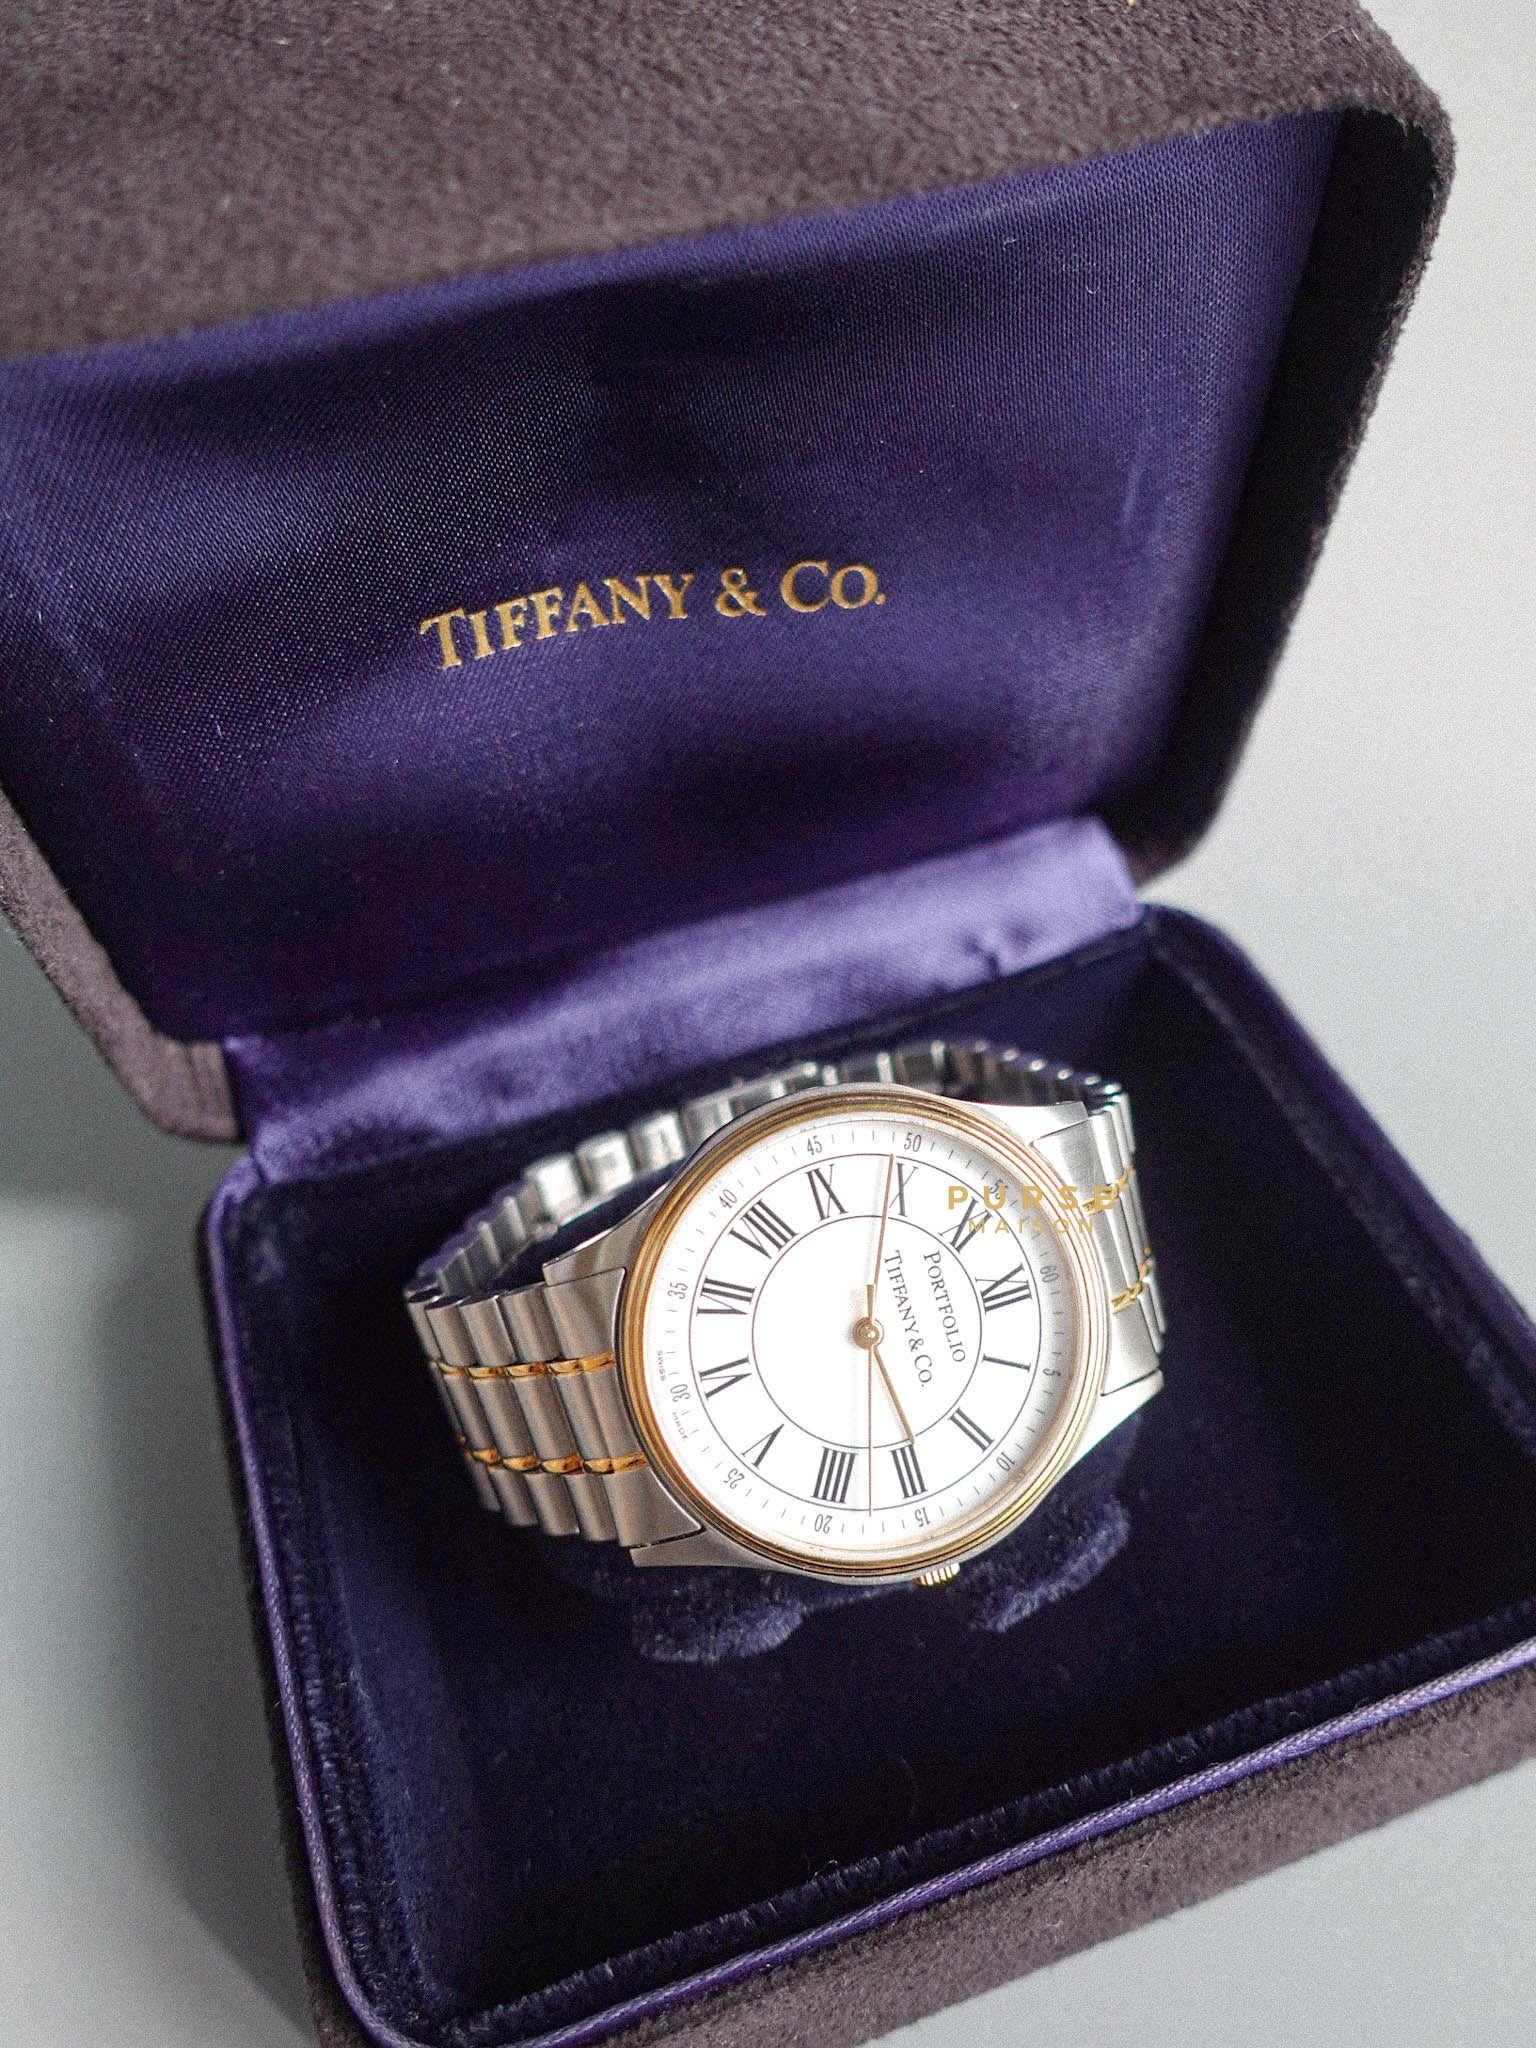 Portfolio by Tiffany & Co. Women's Watch in 18k Yellow Gold and Stainless steel | Purse Maison Luxury Bags Shop